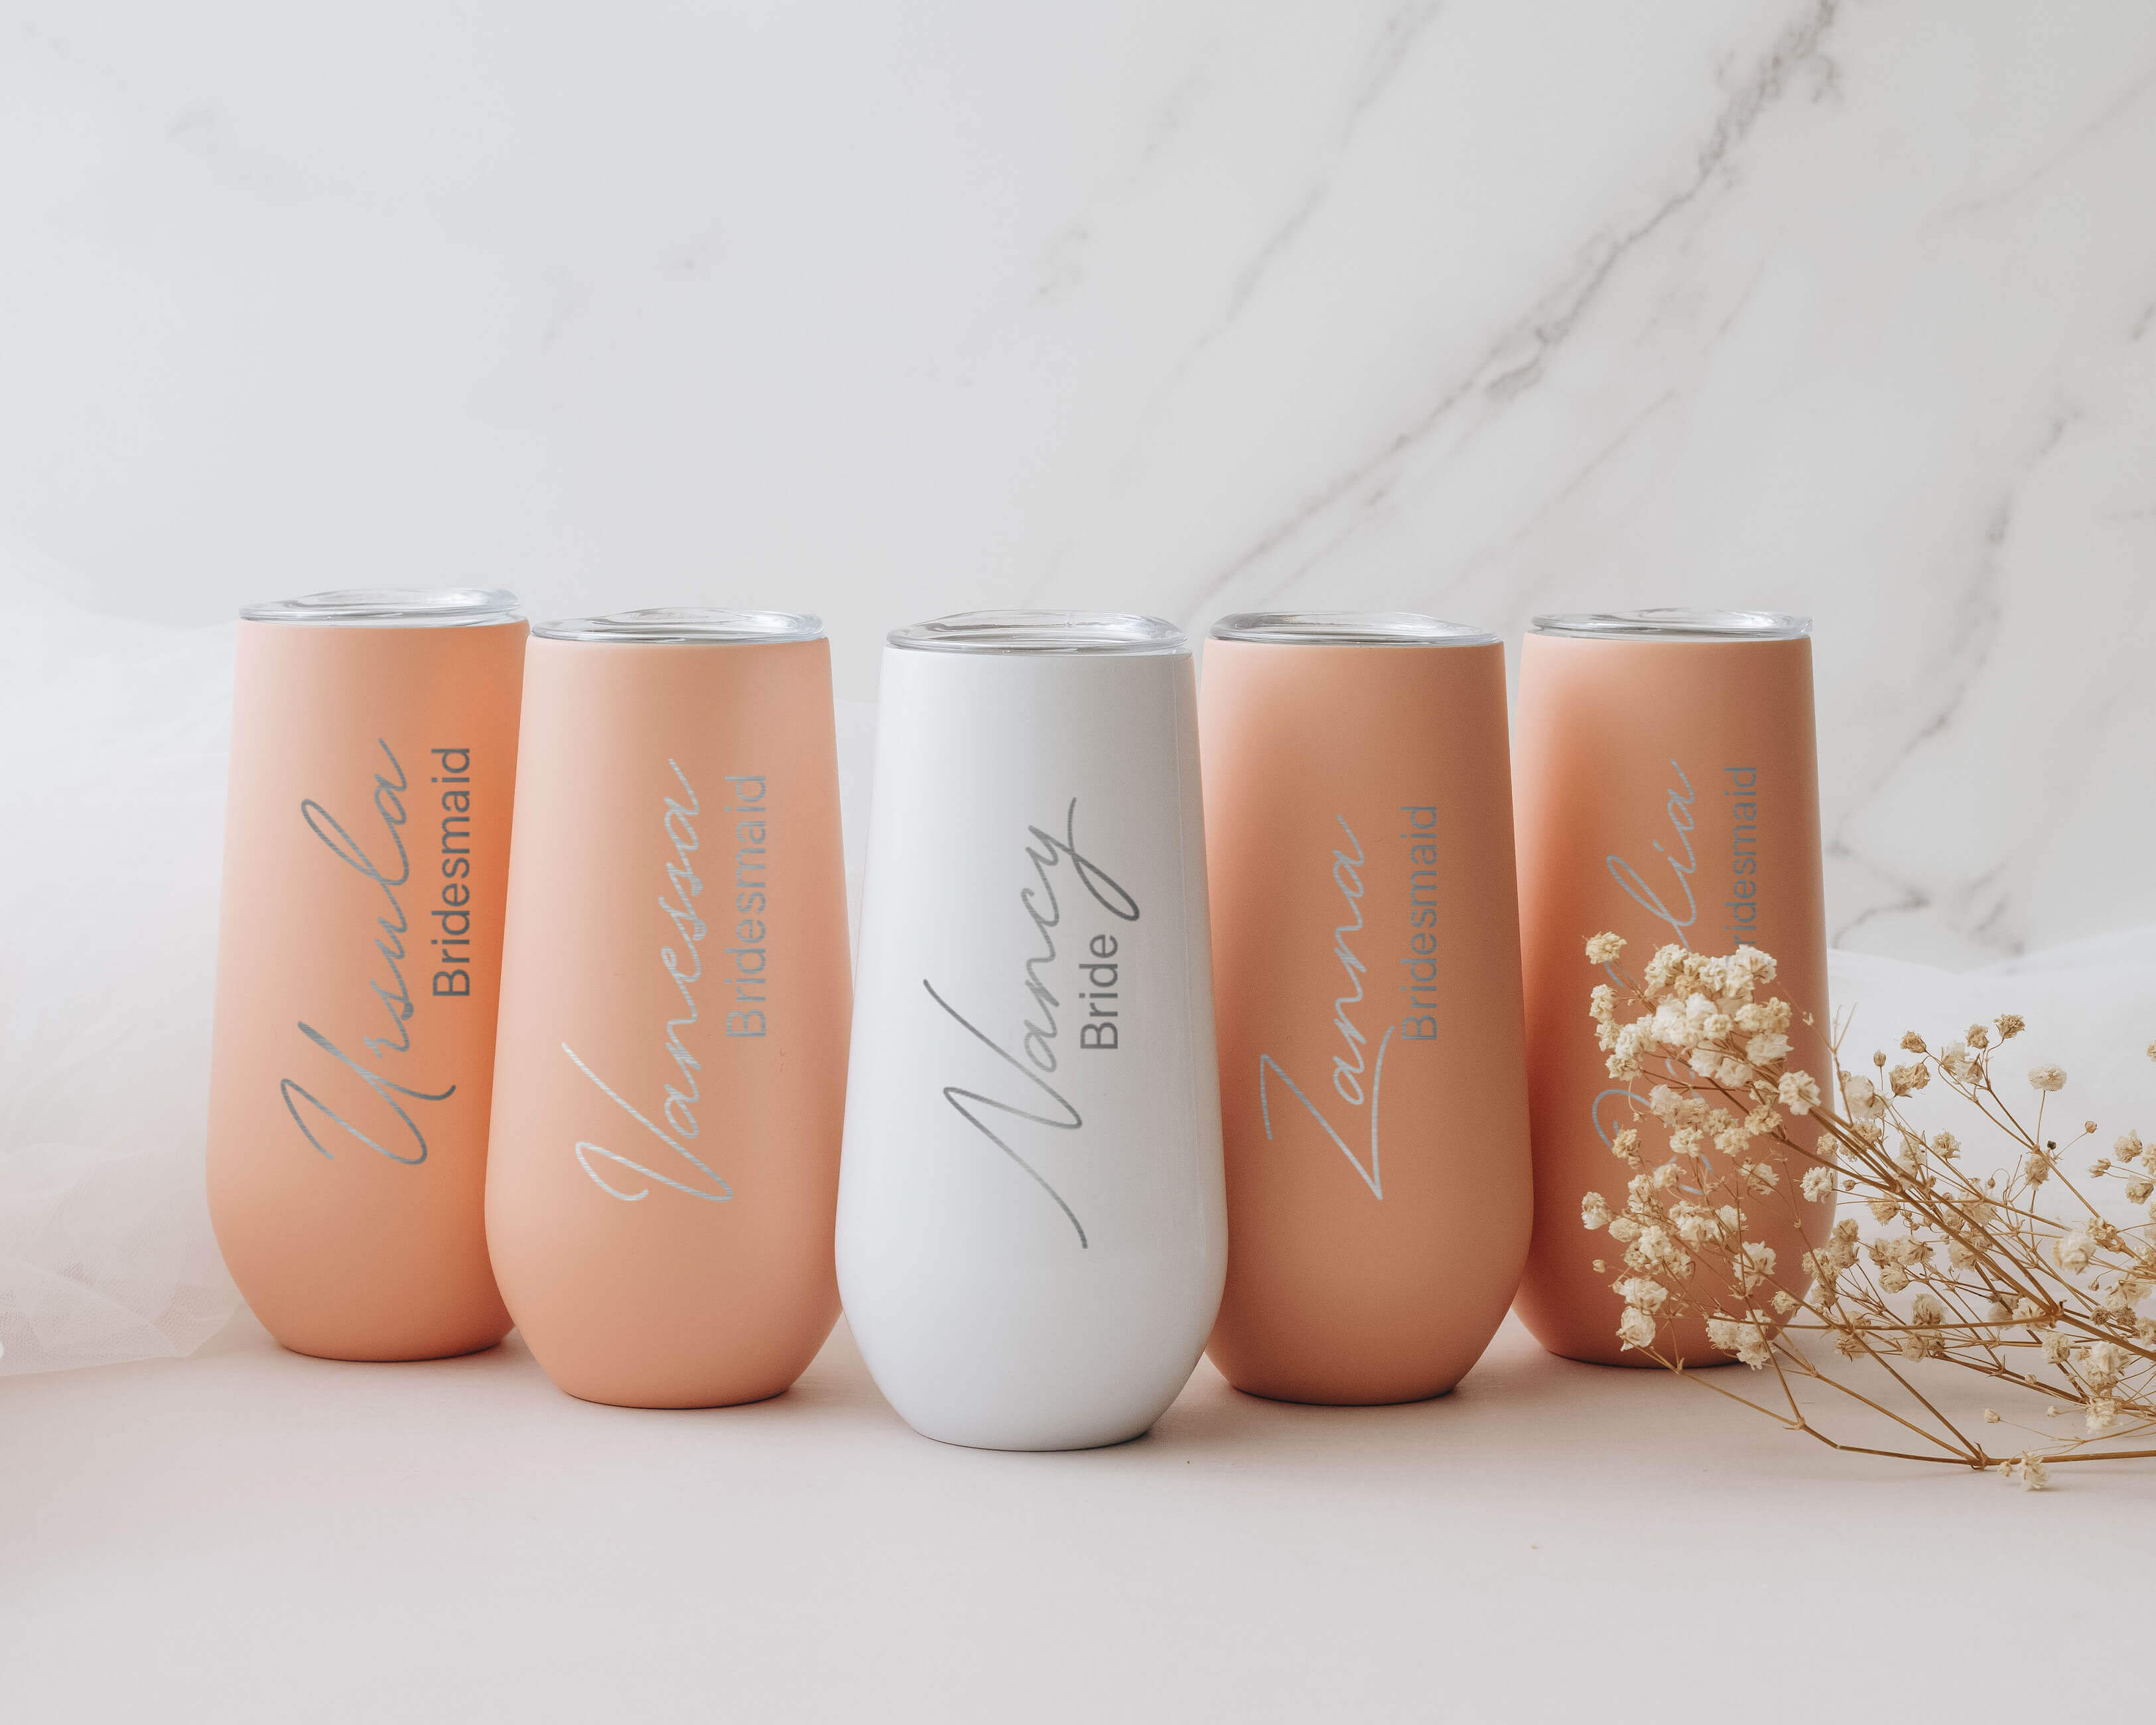 Bridesmaid Tumbler - Customize bridesmaid gifts with personalized pink and white bridesmaid tumblers, available in gold, black, silver, rose gold, and white colors. These tumblers feature their names, making them the perfect addition to any bridesmaid gif